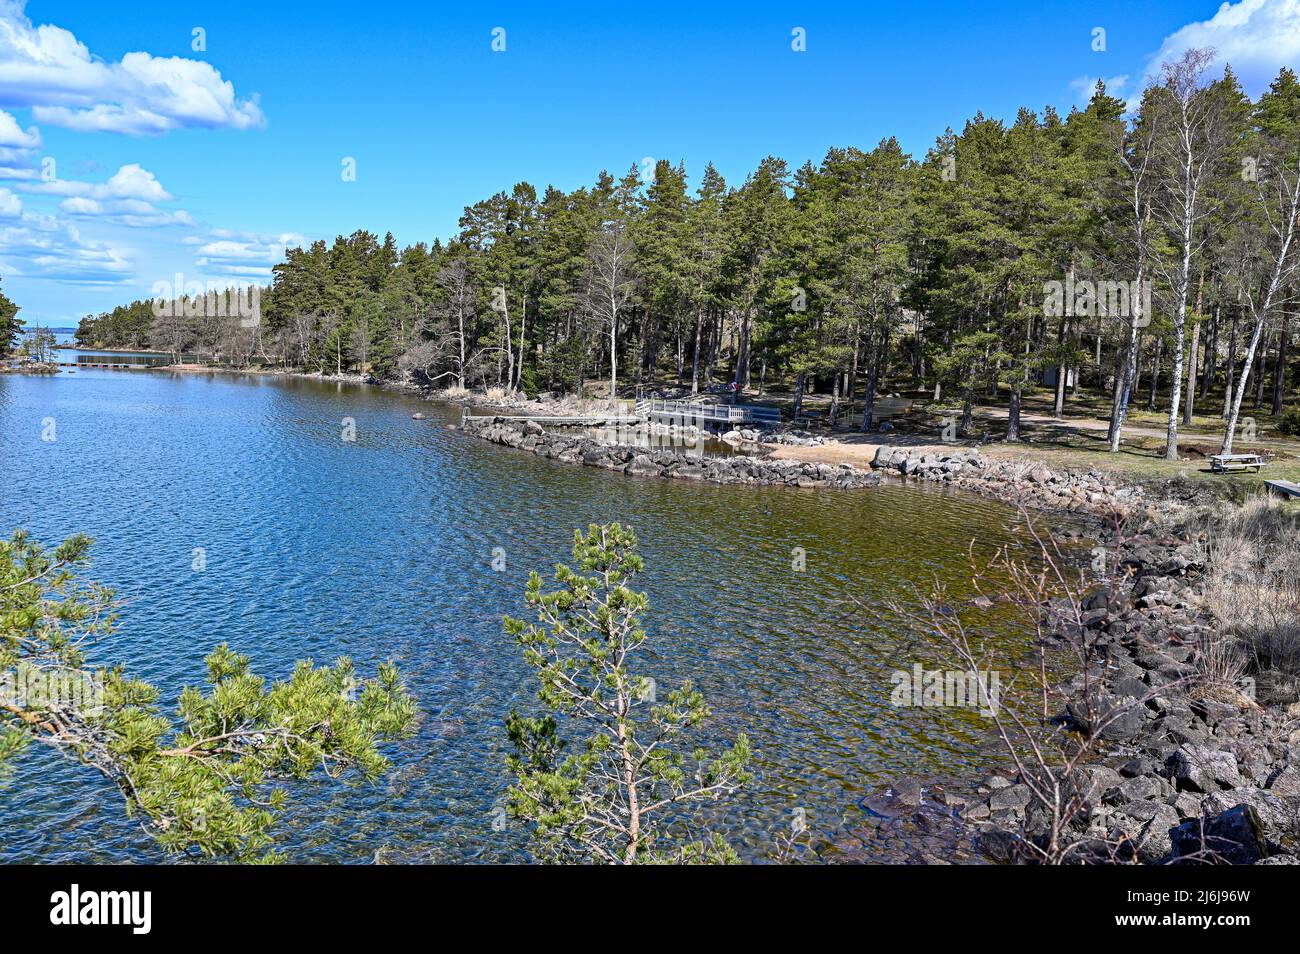 Looking out over lake Vattern and a little beach with a jetty Stock Photo